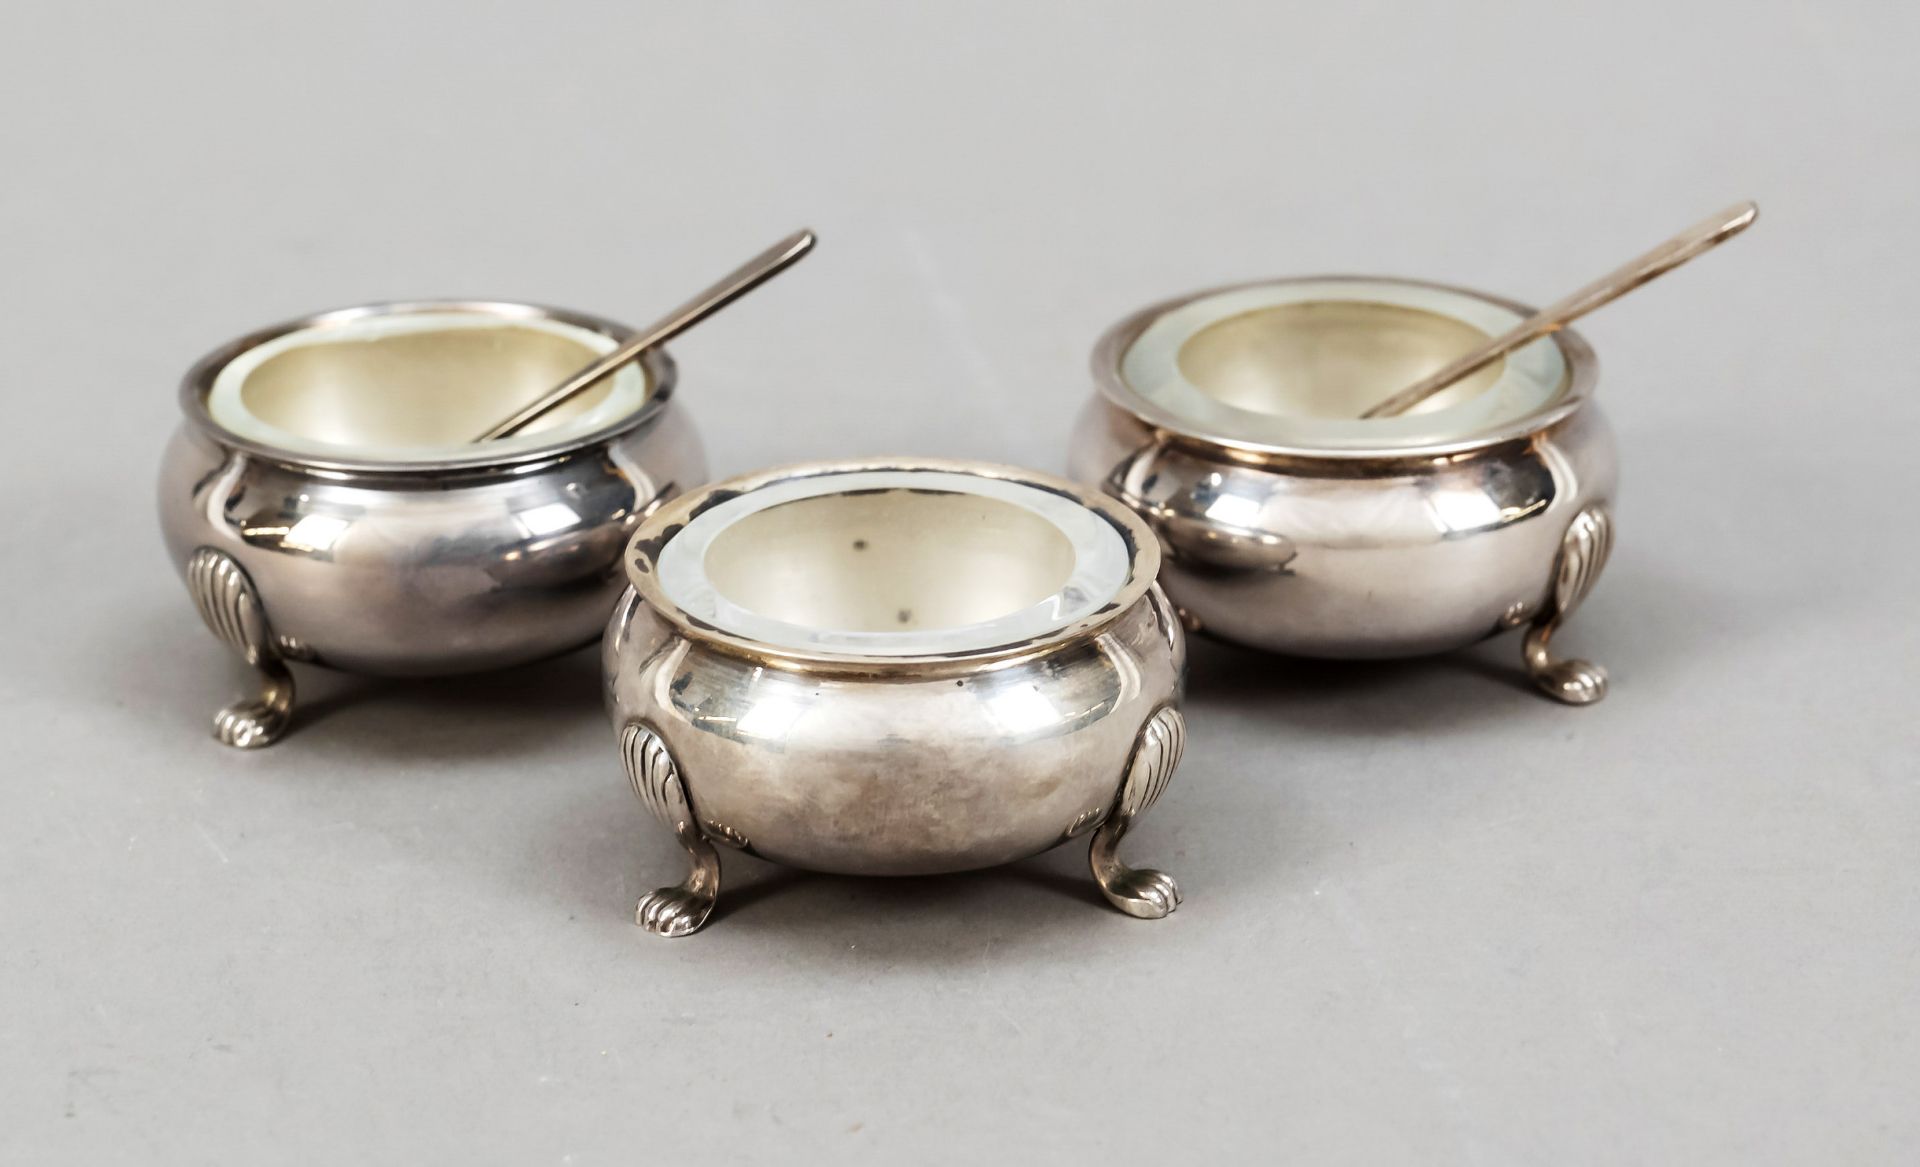 Three salvers with 2 spoons, 20th century, silver 950/000, on 3 feet, smooth bulbous body,